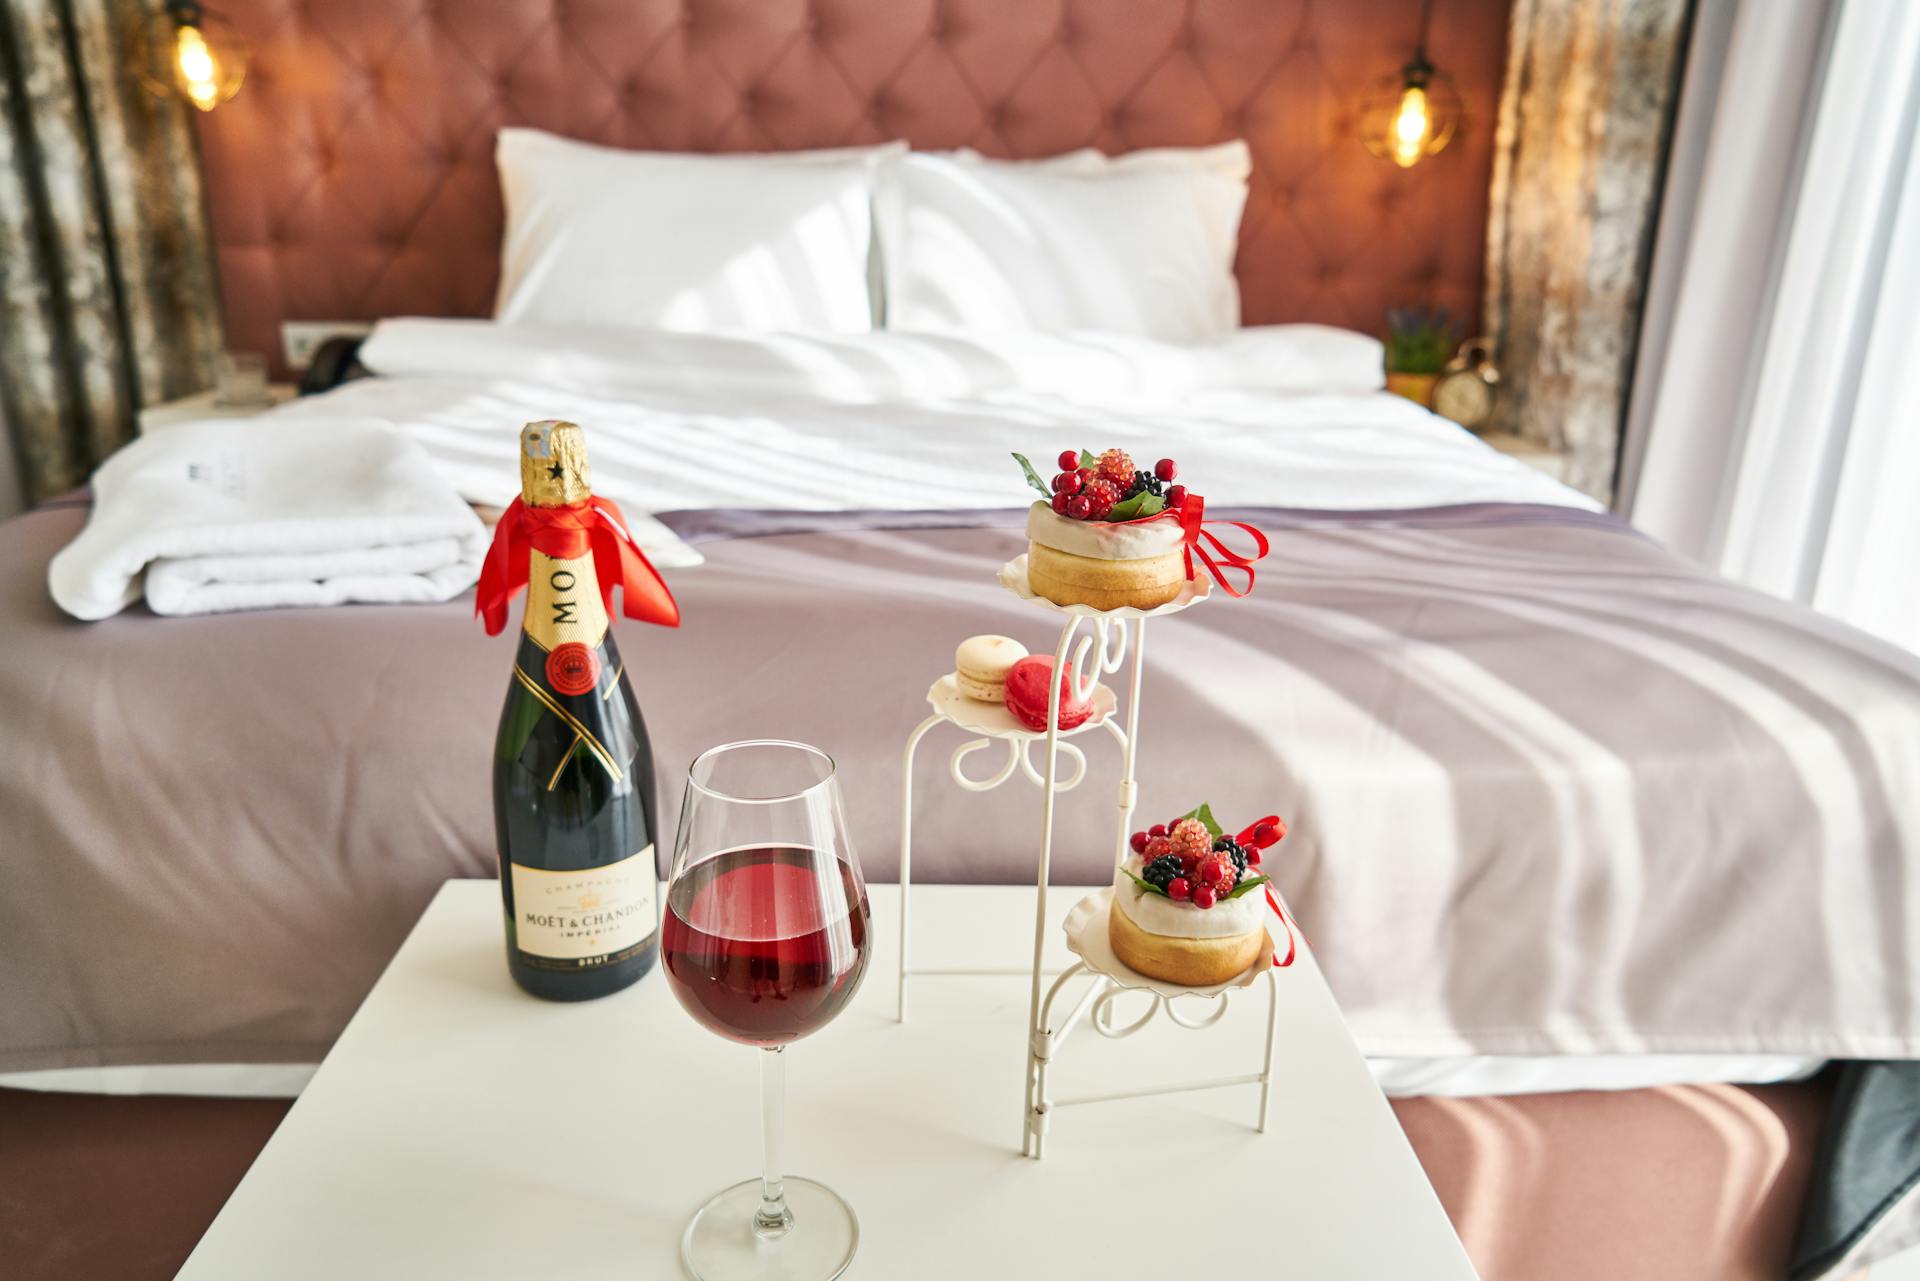 A hotel room with food and wine | Source: Pexels